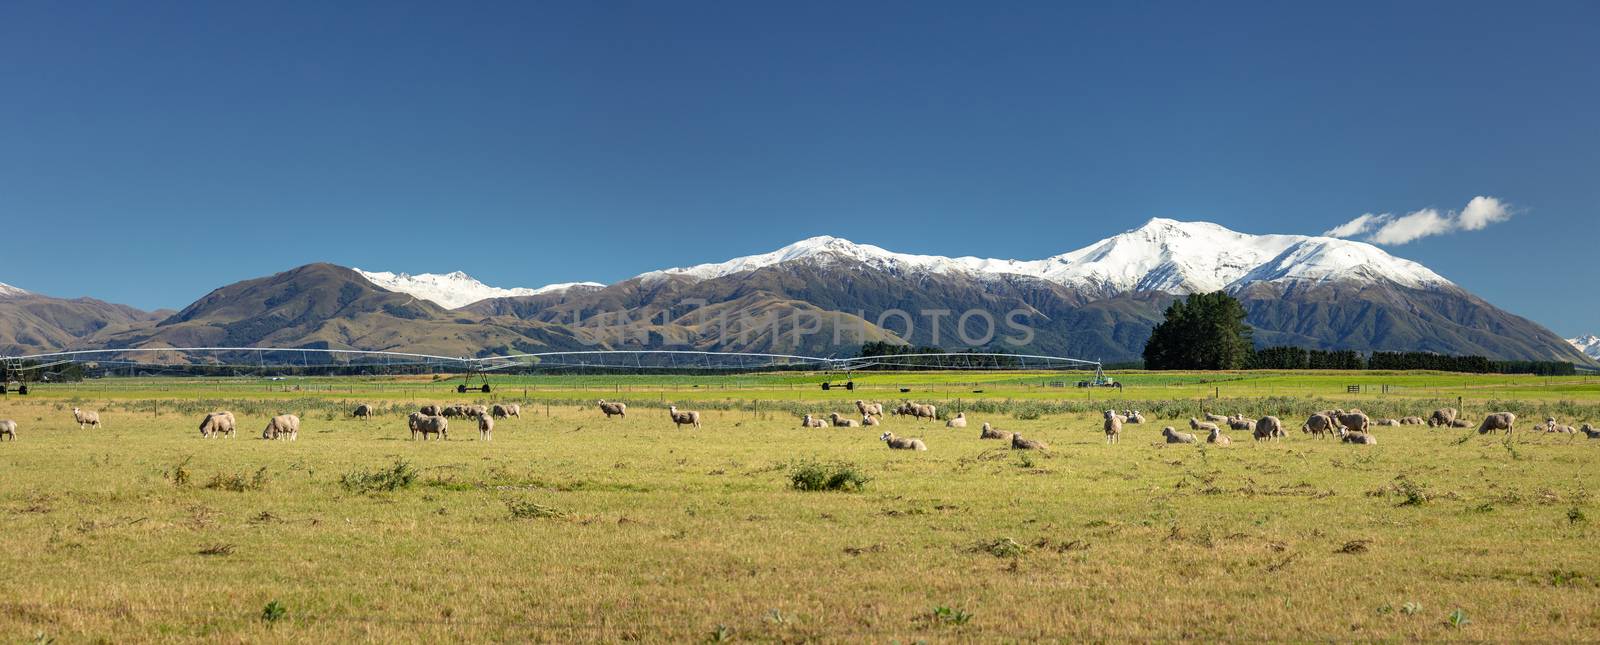 Mount Taylor and Mount Hutt scenery in south New Zealand by magann